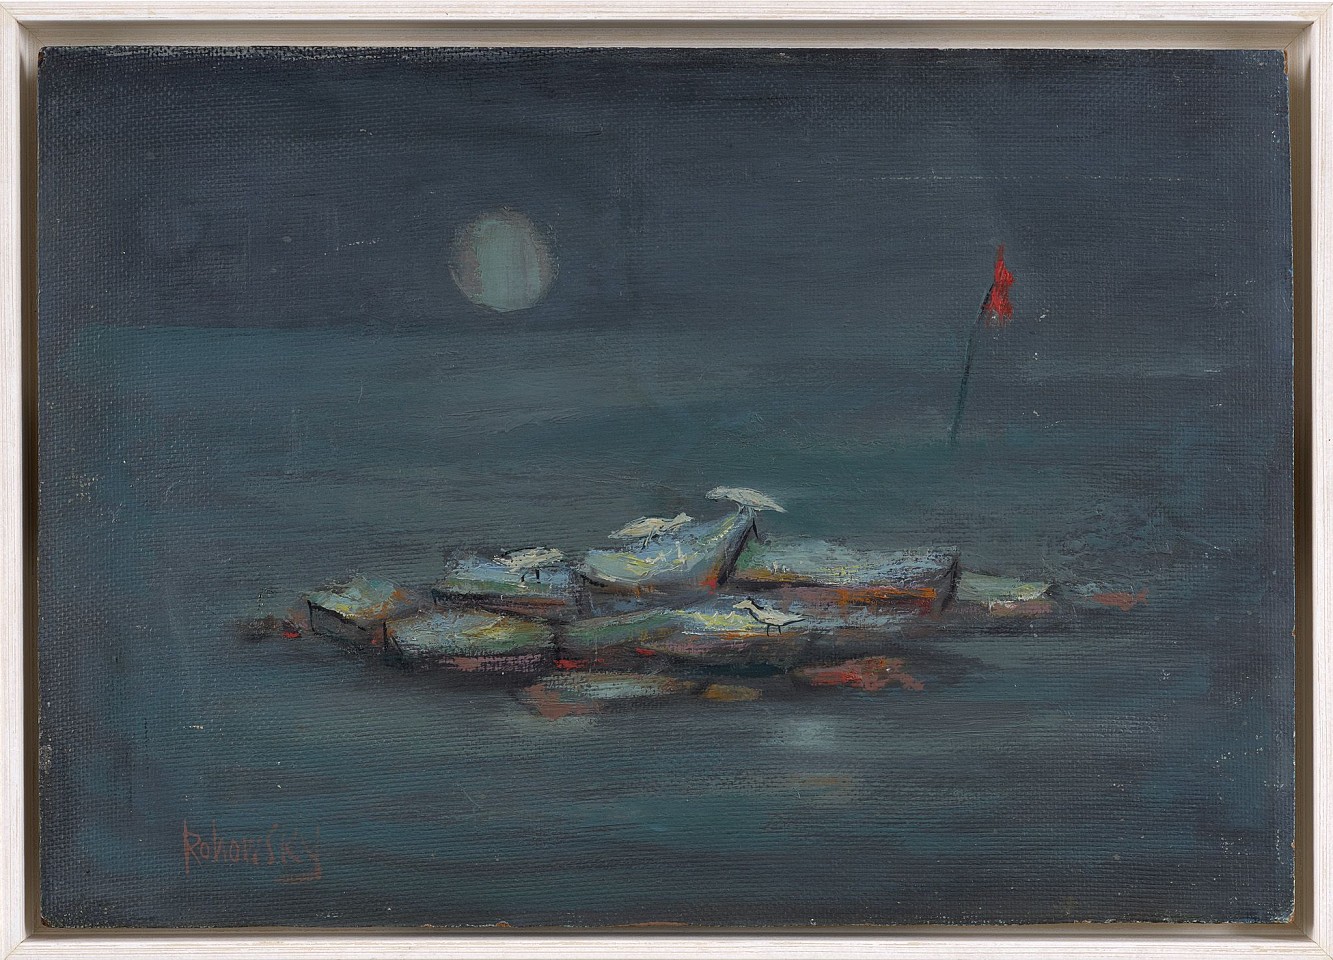 Meyers Rohowsky, Mohegan, Moonrise, c. 1965
Oil on panel, 12 1/4 x 17 1/2 in. (31.1 x 44.5 cm)
ROH-00009